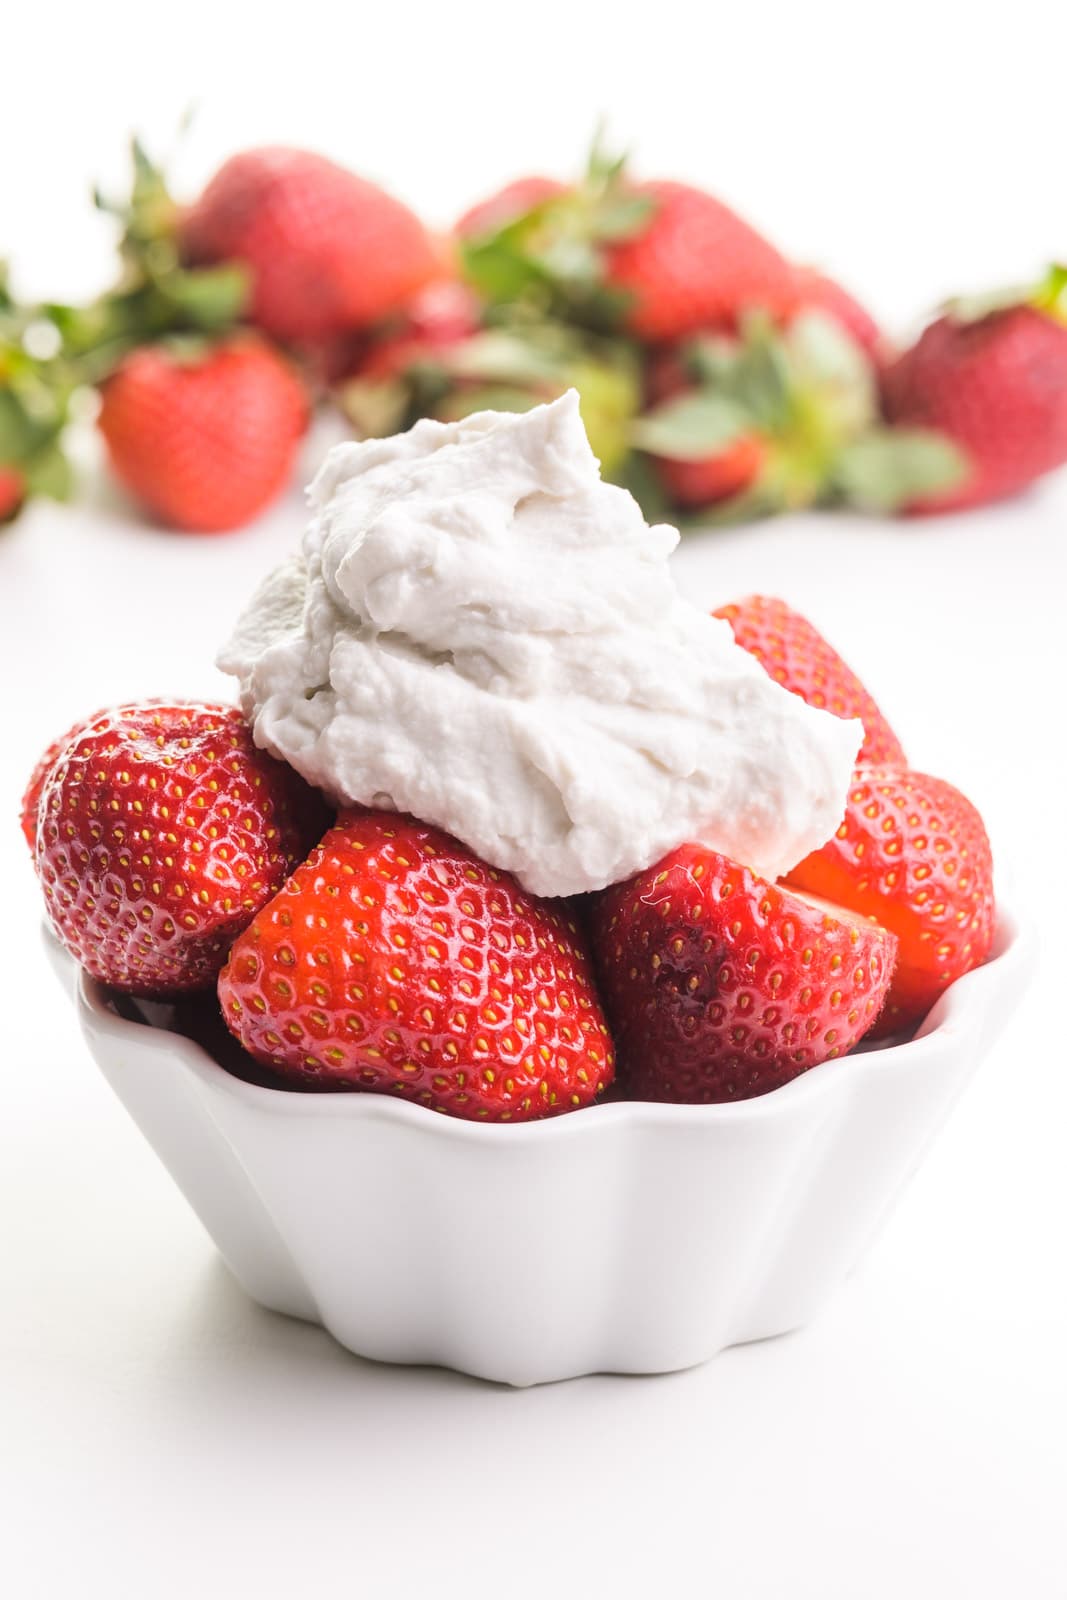 A bowl of strawberries has coconut whipped cream on top. There are more strawberries in the background.